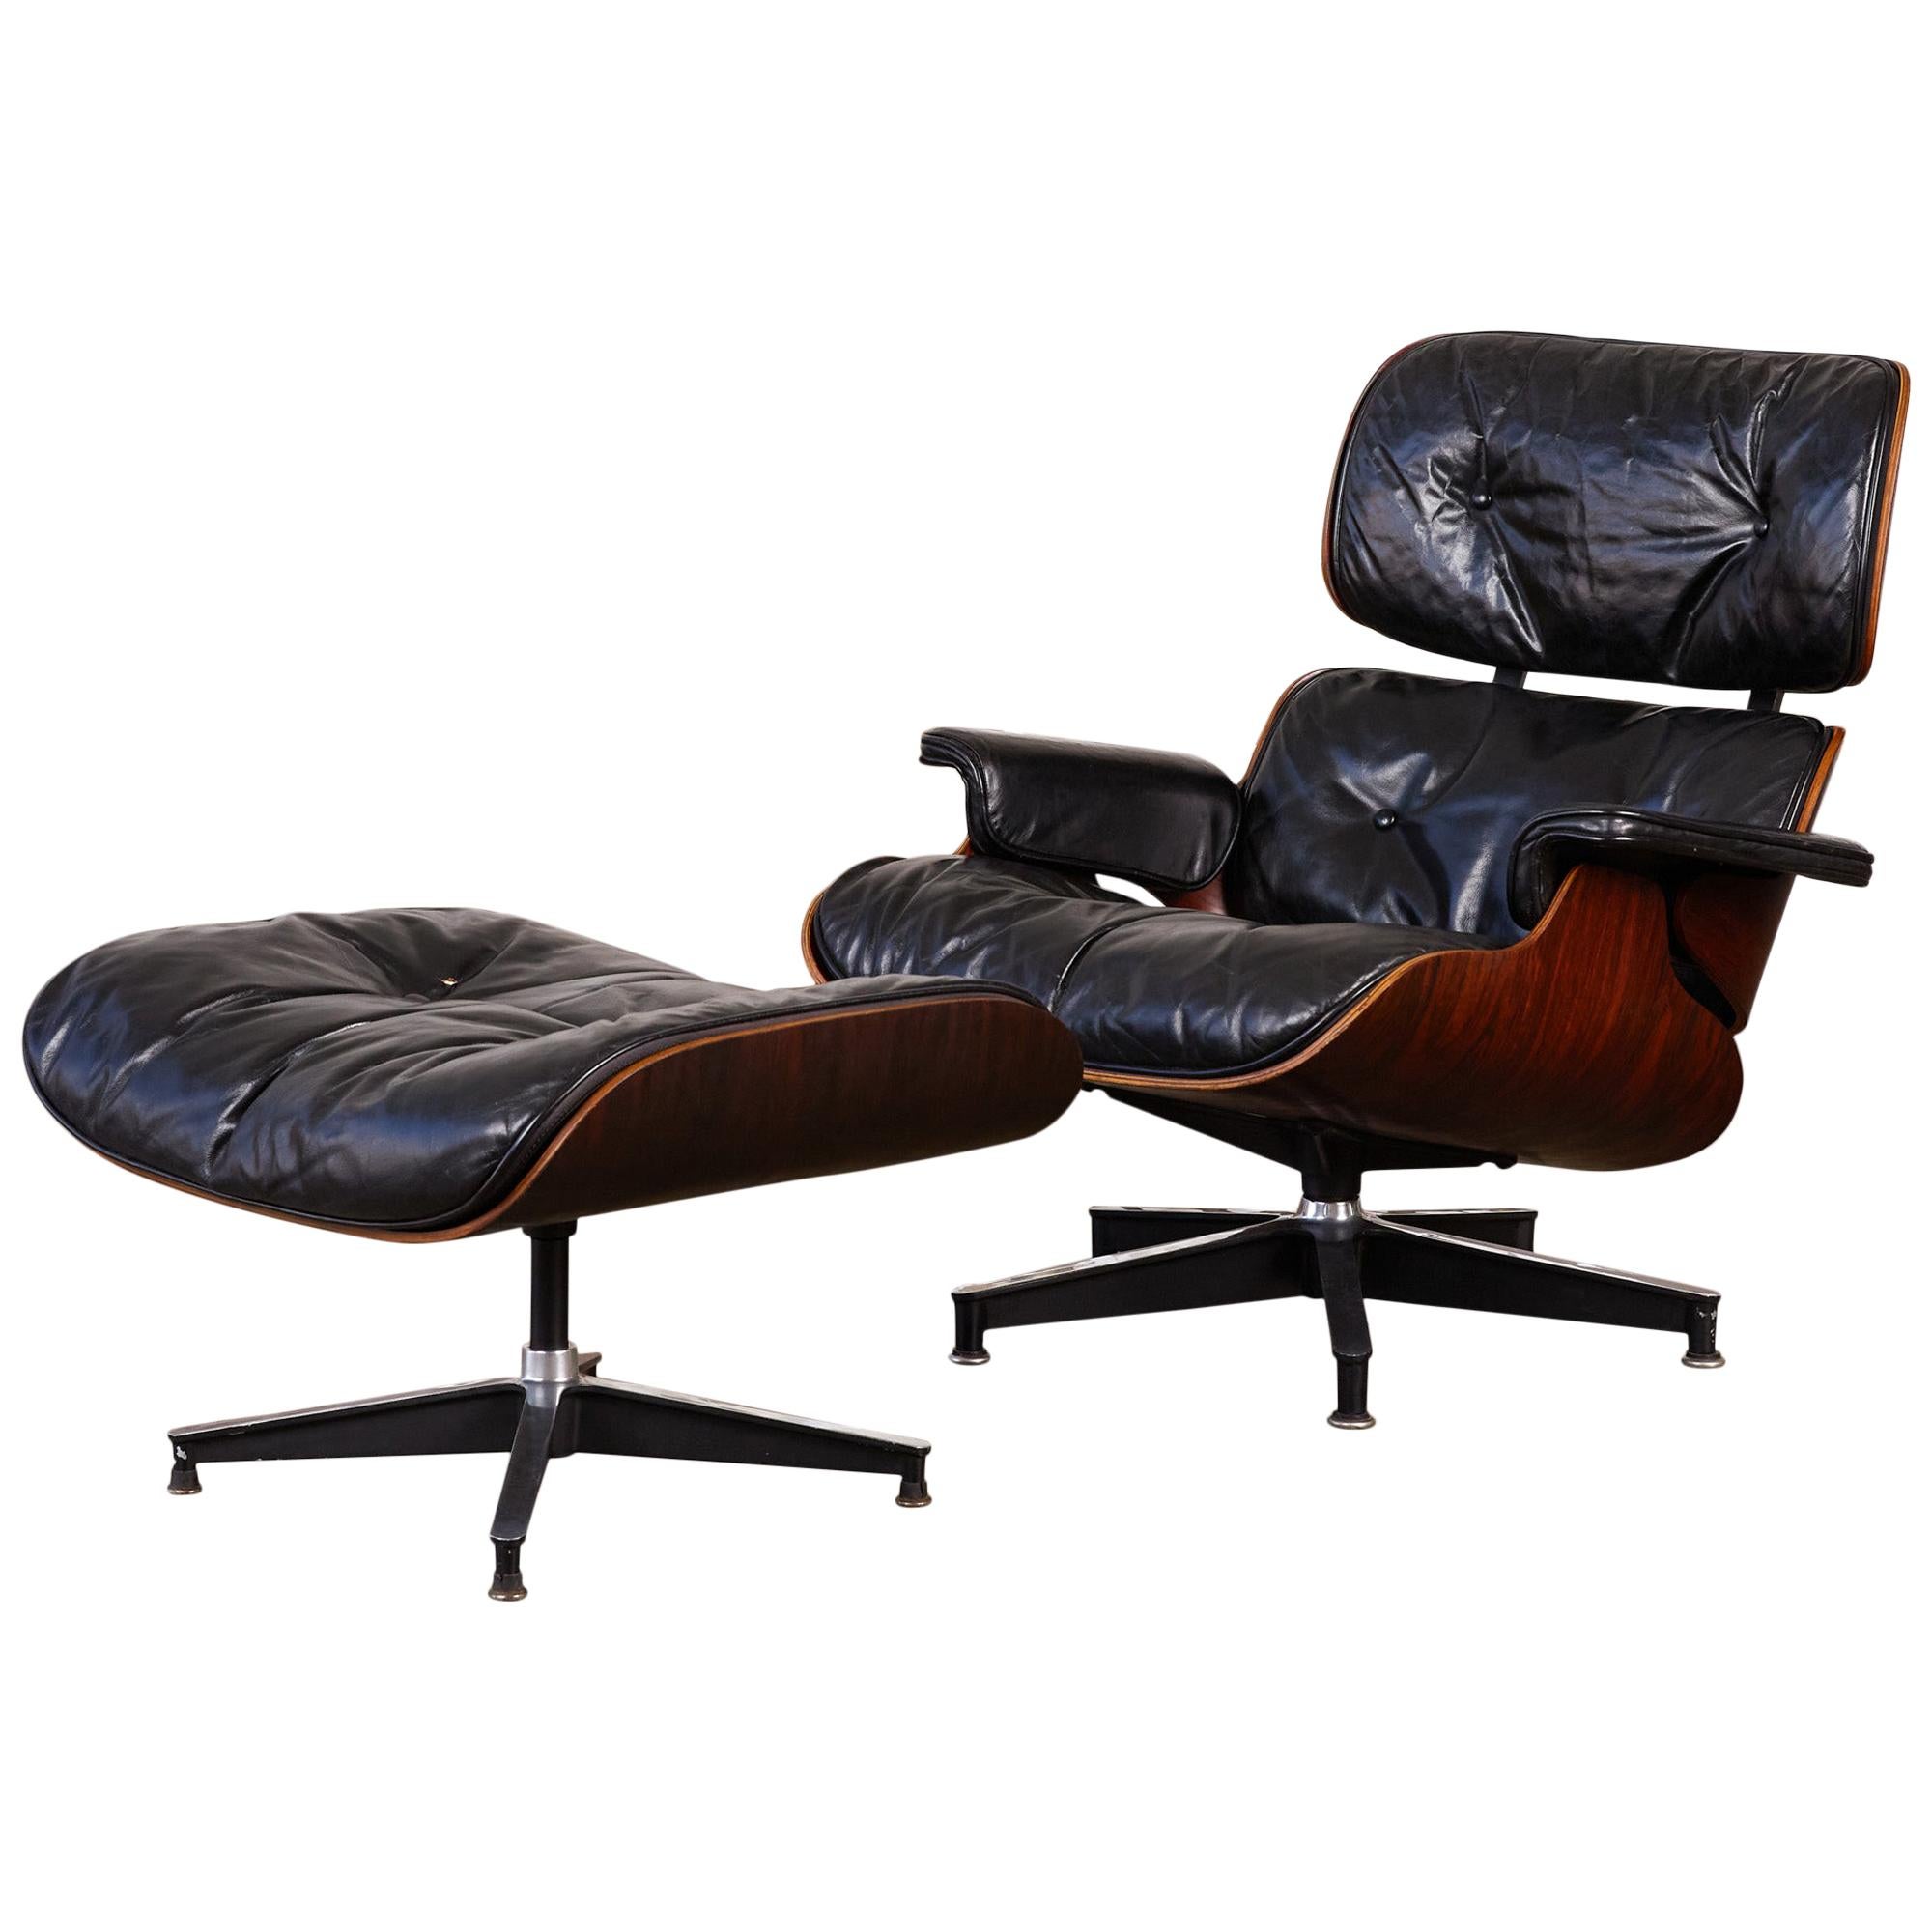 Rare 1956 First Year Production Eames Lounge Chair with Spinning Ottoman